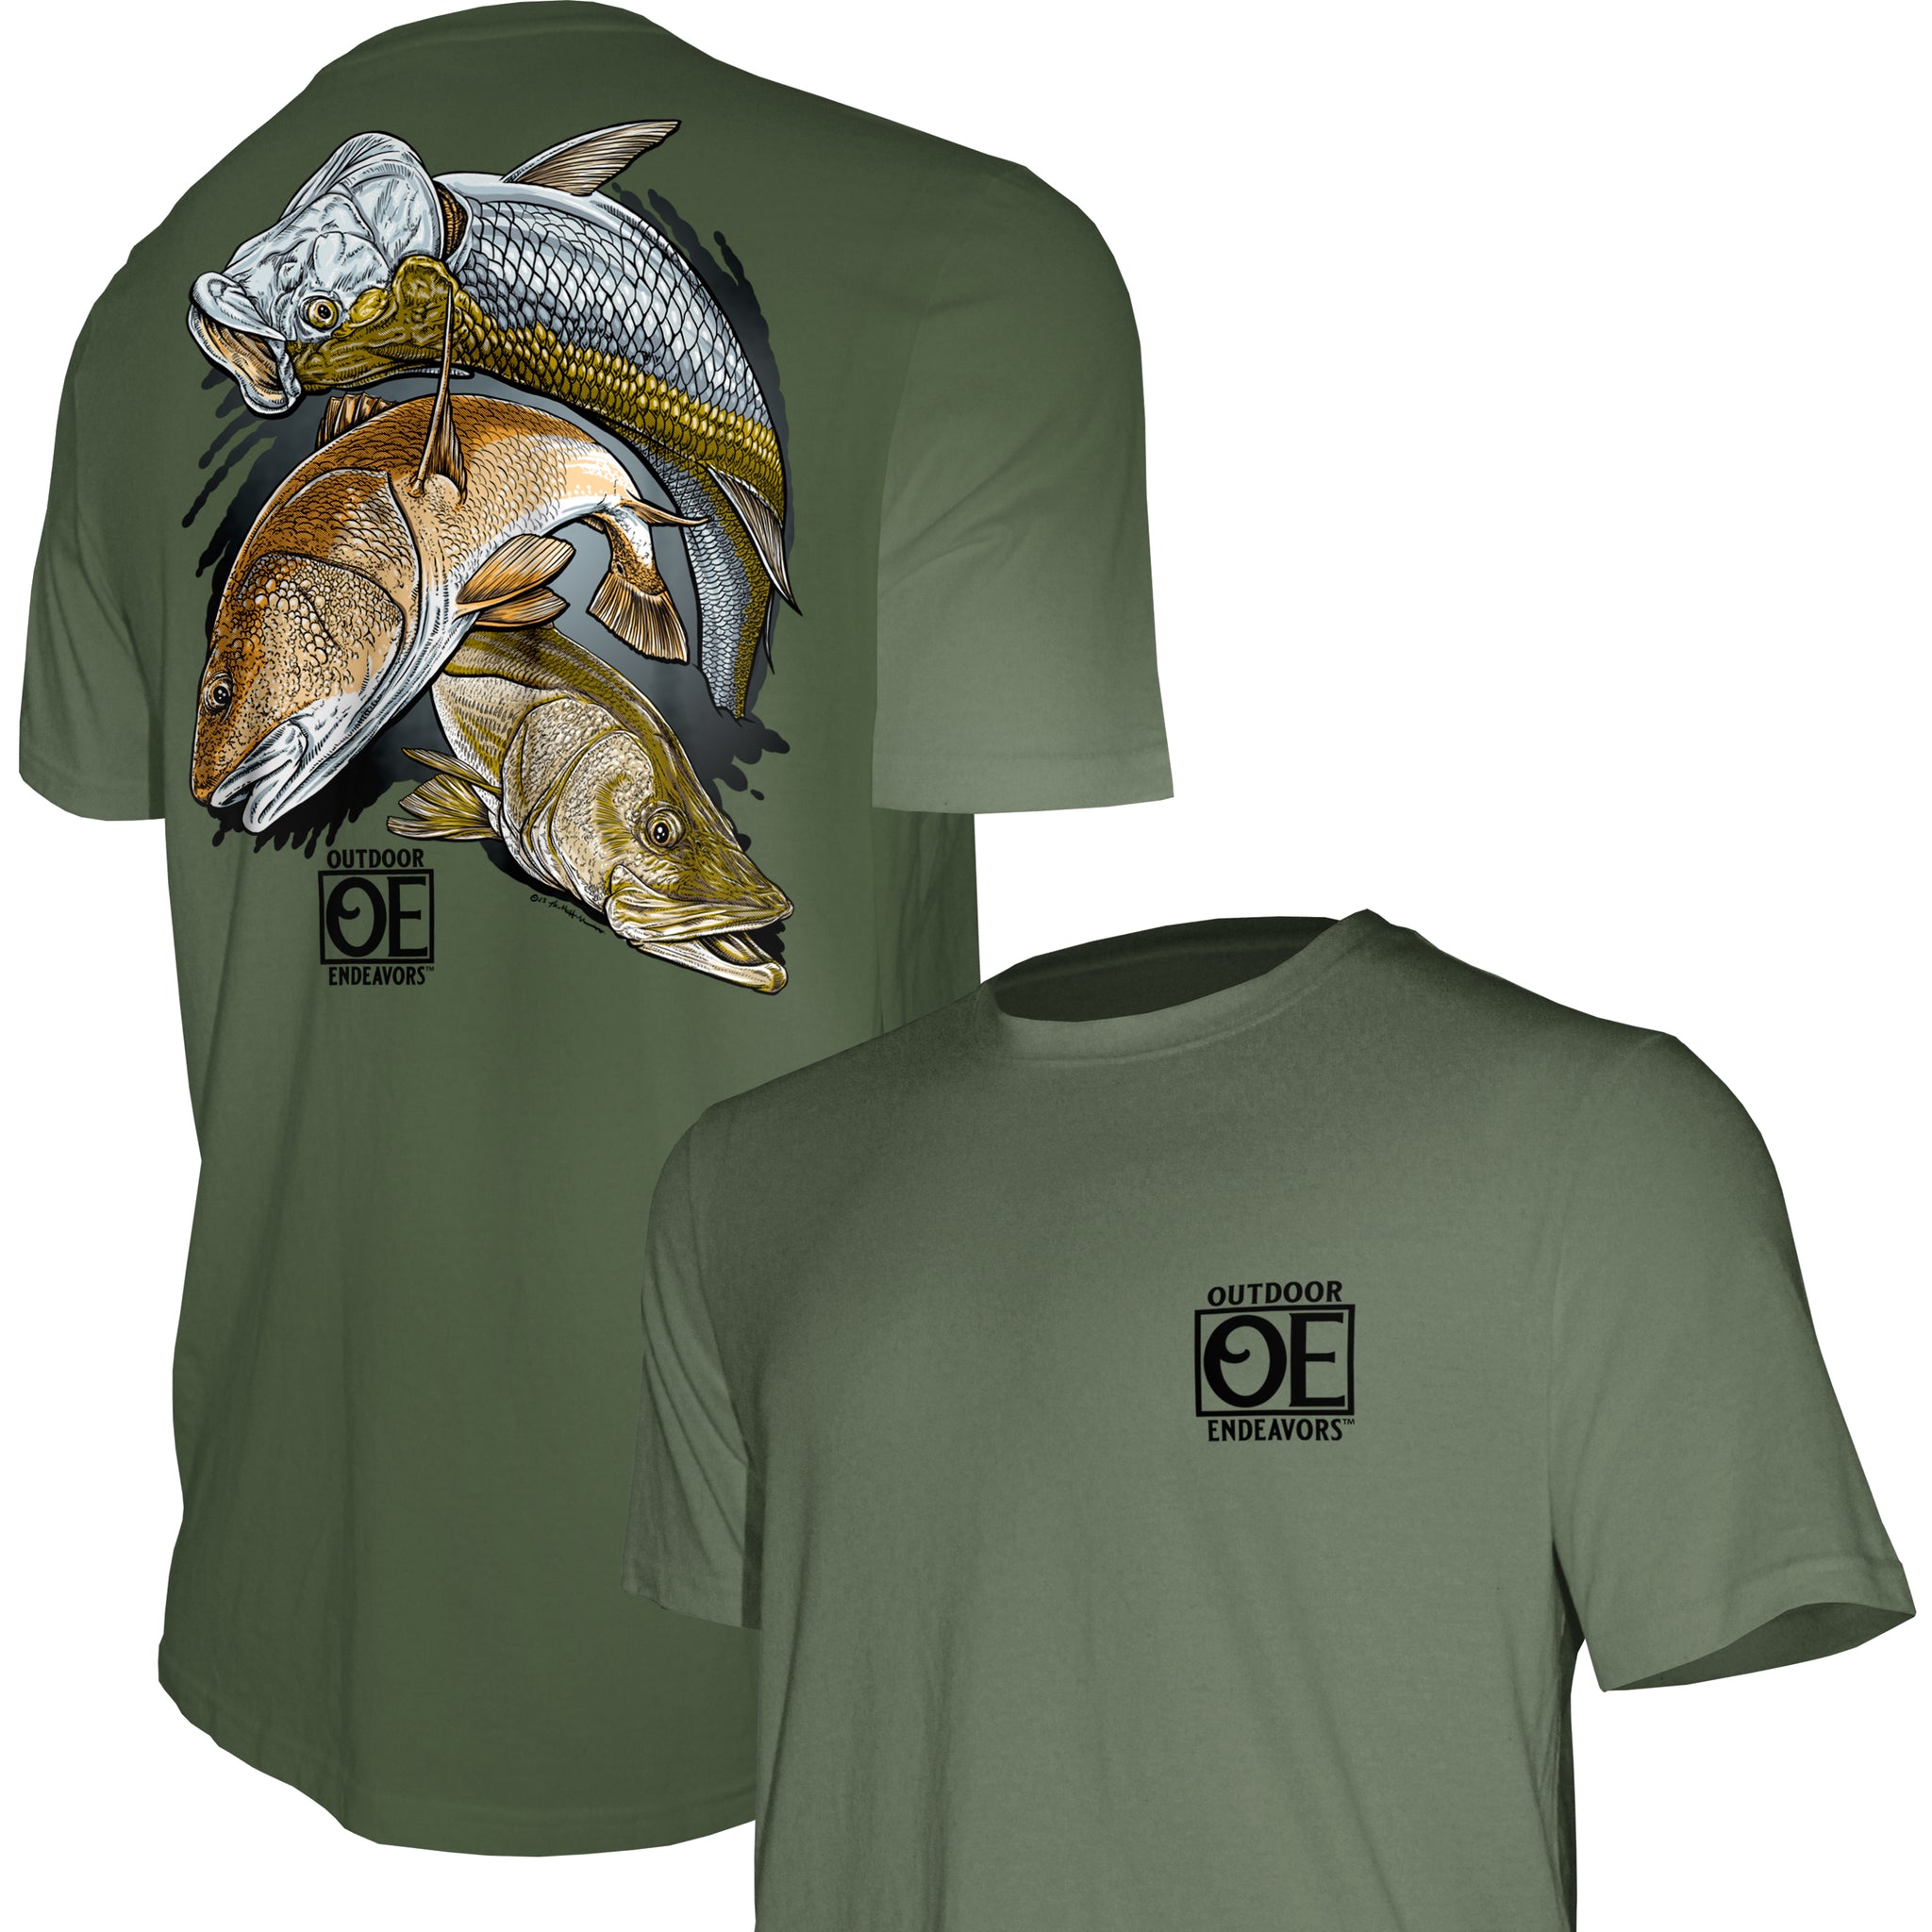 Outdoor Endeavors Classic - American Made Tee - Southern Flats Slam